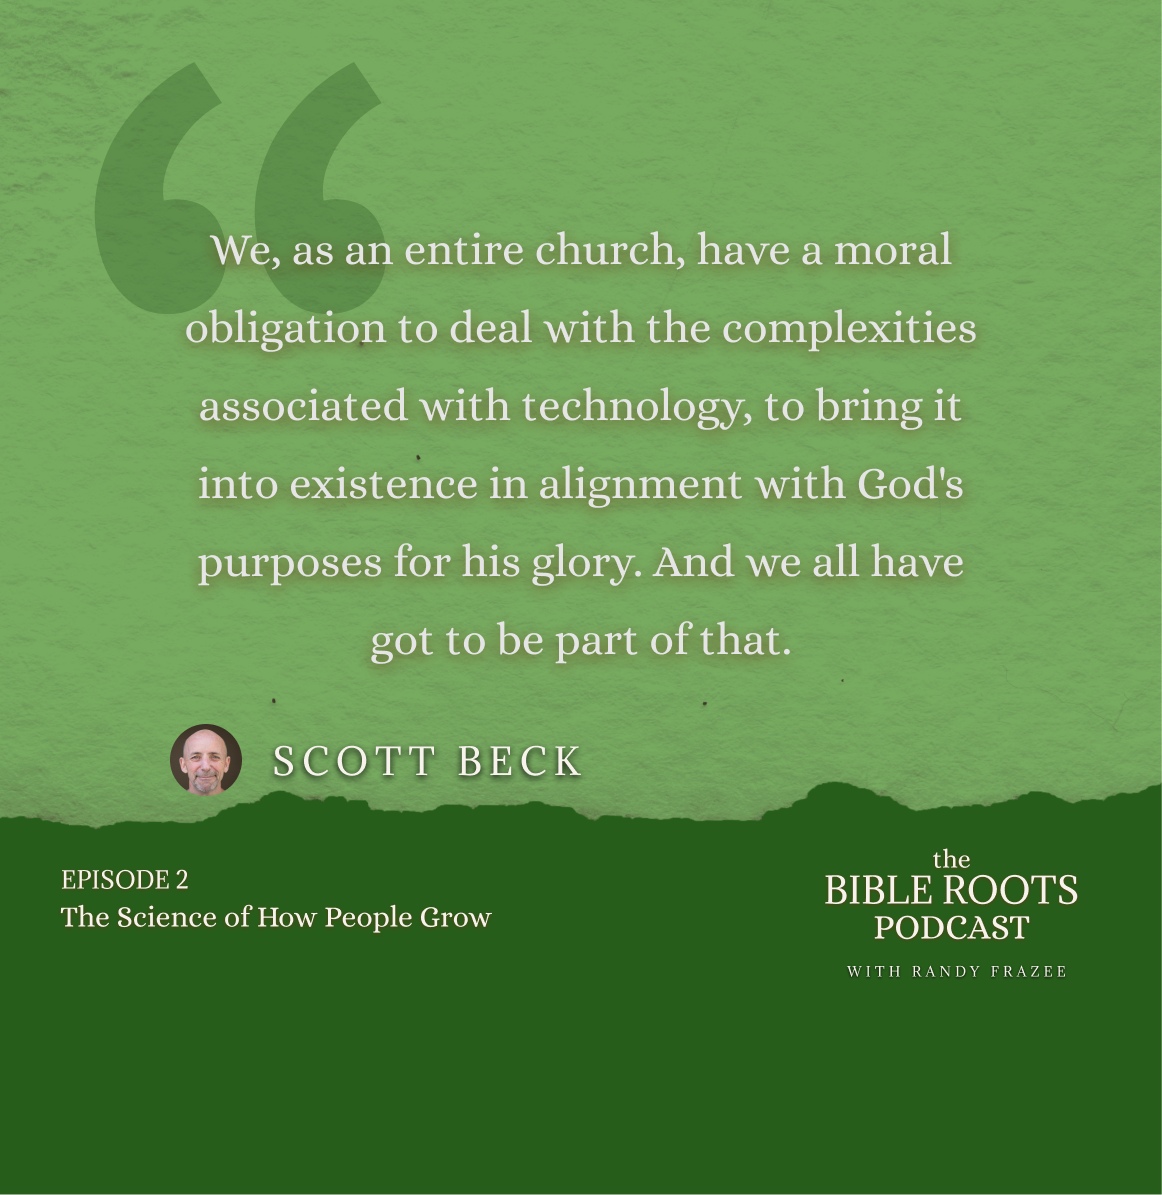 We, as an entire church, have a moral obligation to deal with the complexities associated with technology, to bring it into existence in alignment with God's purposes for His glory. And we have got to be part of that.